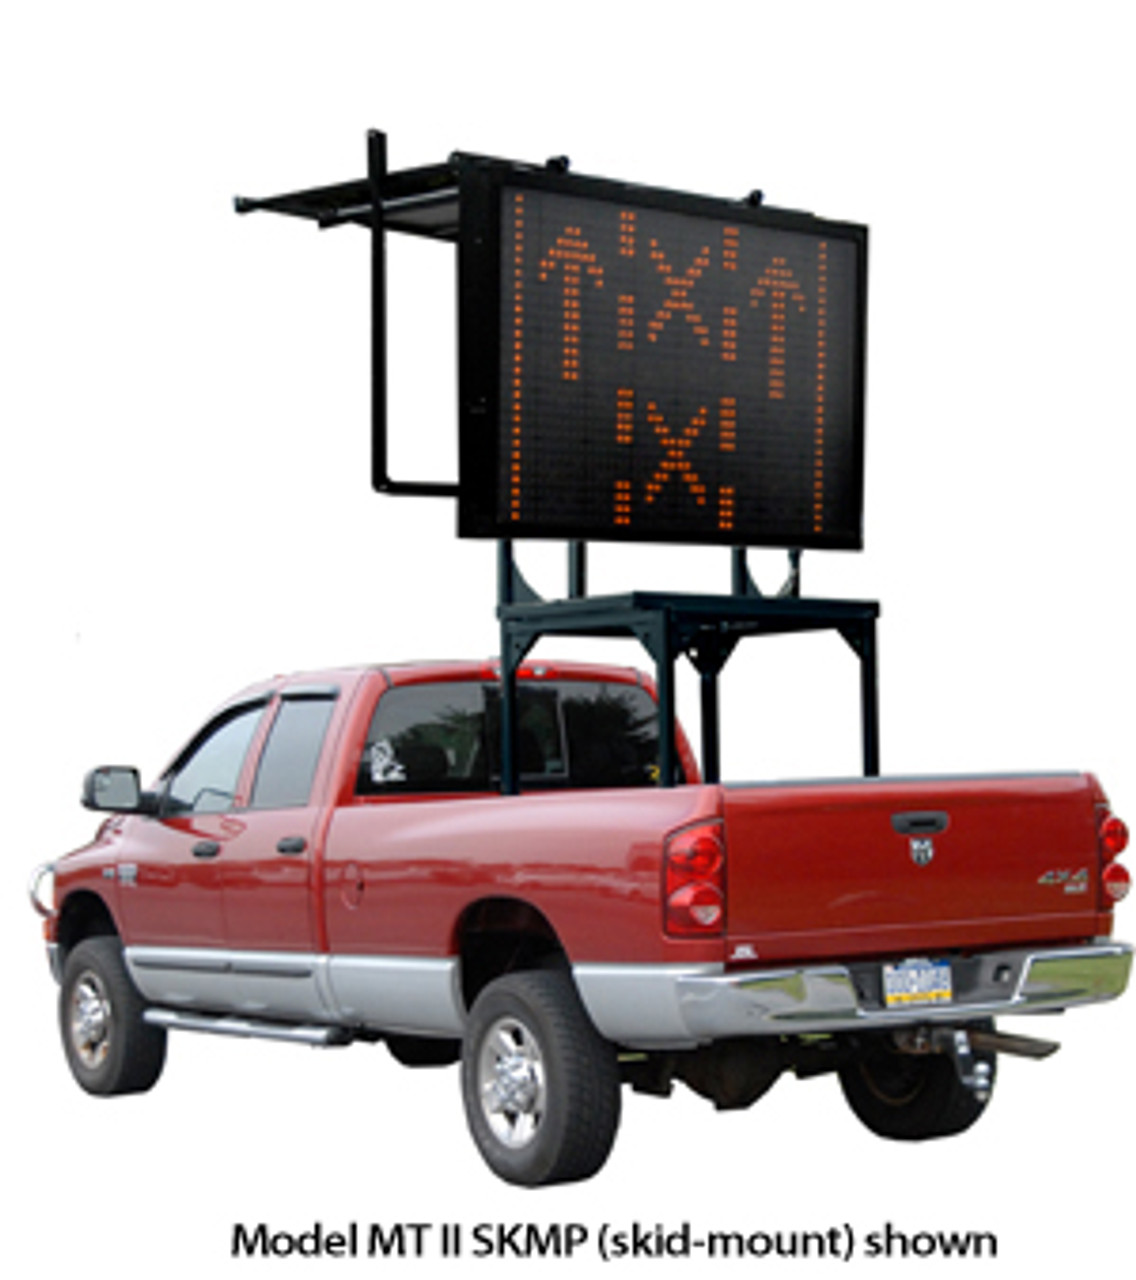 Solar Powered Vehicle Mount Silent Messenger Portable Changeable Message Board by SolarTech